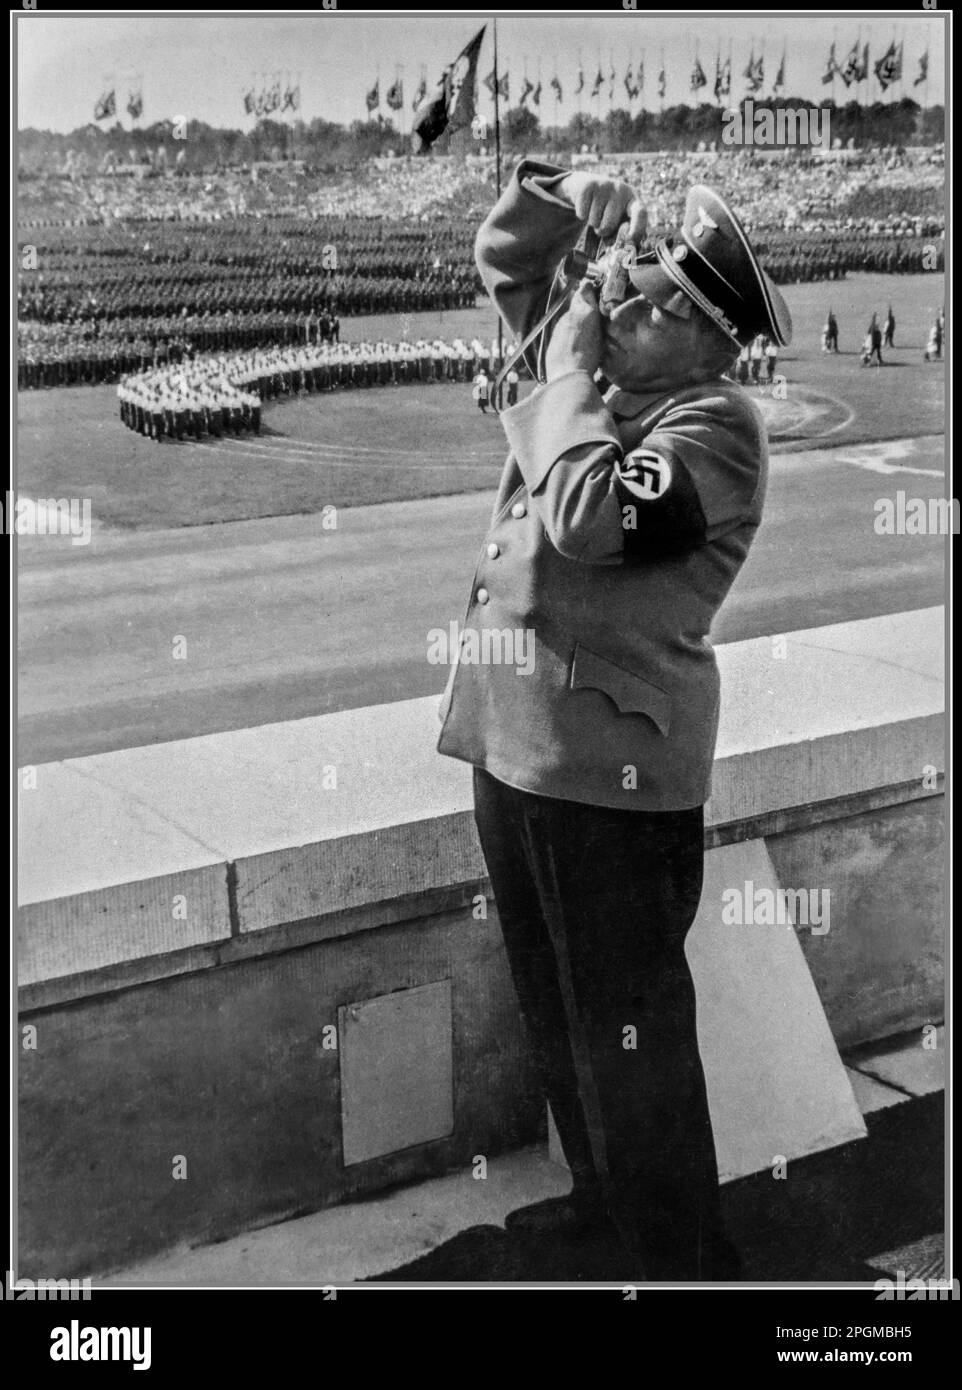 NUREMBERG Nazi official wearing a swastika armband photographs a huge Nazi Party Nuremberg Rally in the 1930s, using a German Leica 35mm film camera Nuremberg Nazi Germany (from the Eva Braun Photo Albums) Stock Photo